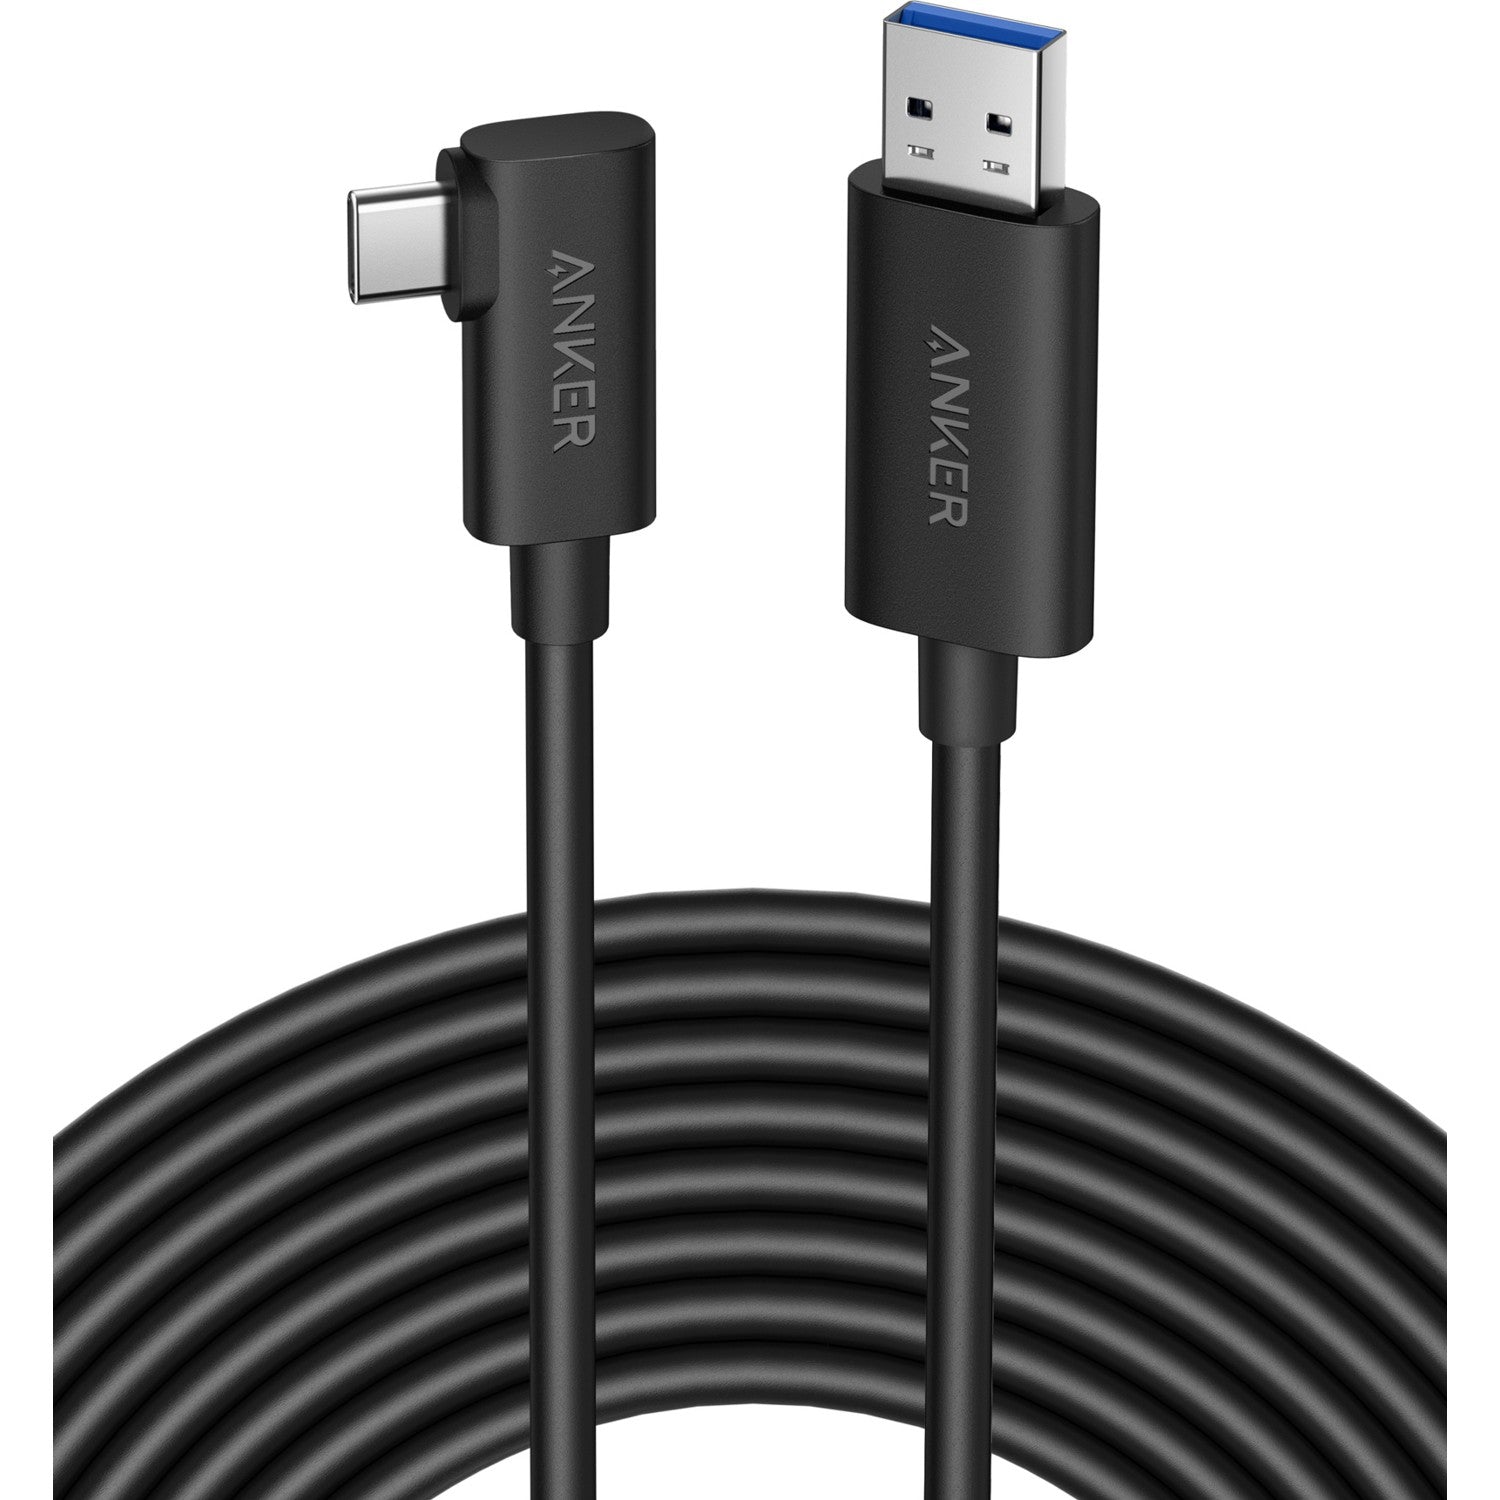 Anker 712 USB-A to USB-C 5 Meter Fiber Optic Data and Charging Cable